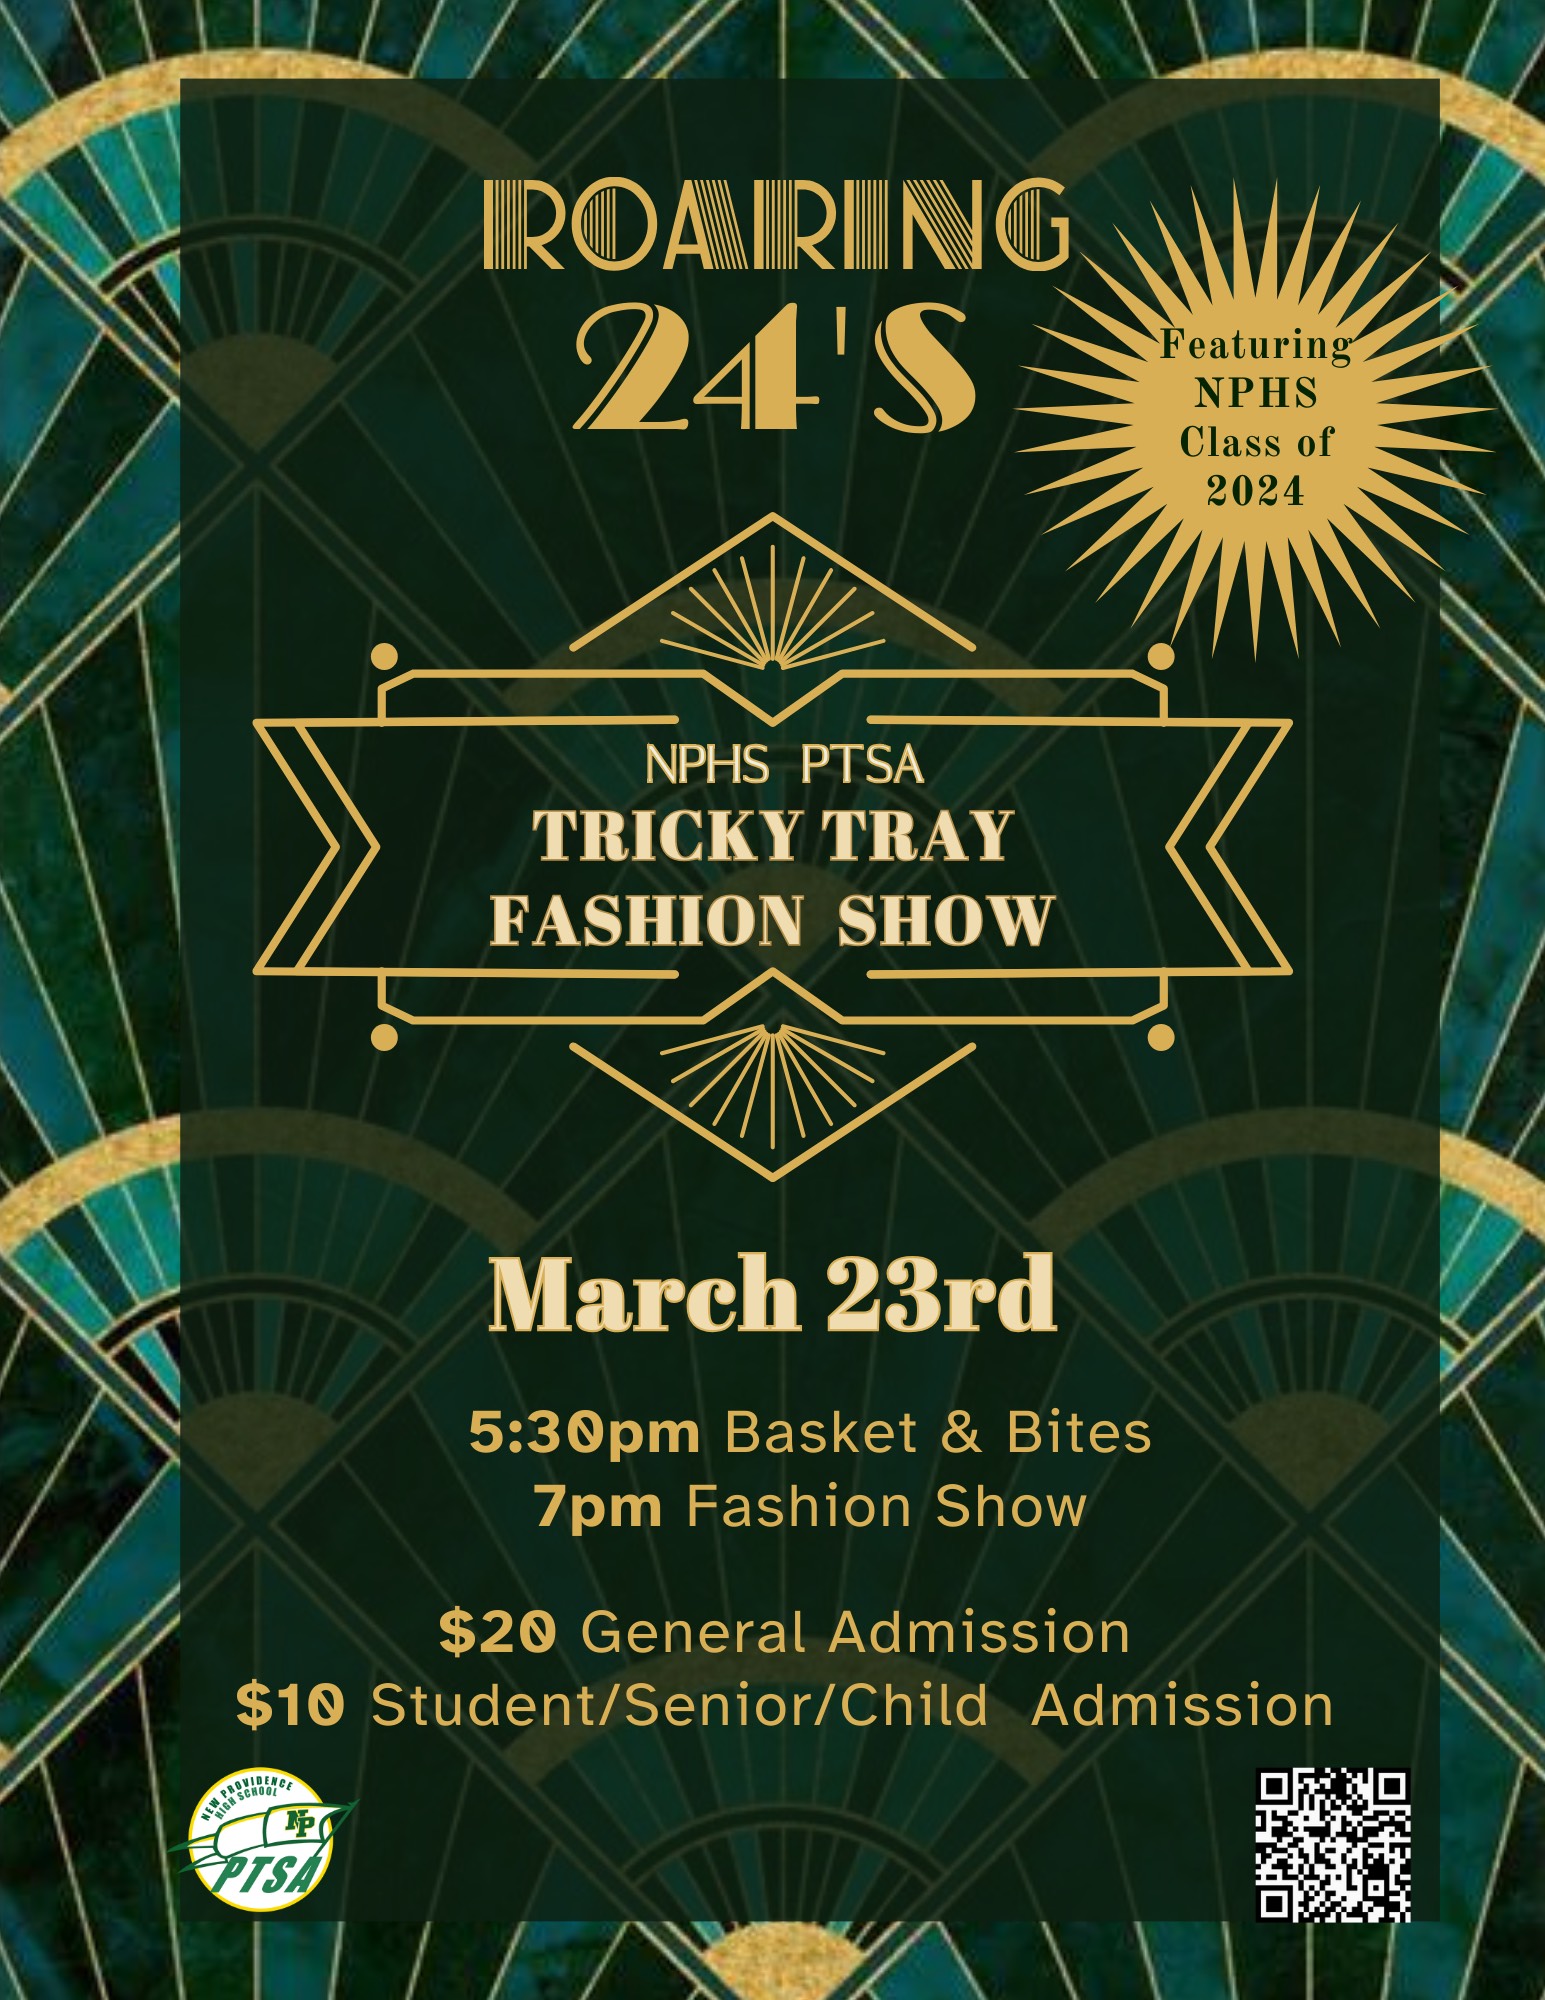 “Roaring 24’s” annual Tricky Tray & Fashion Show – March 23rd